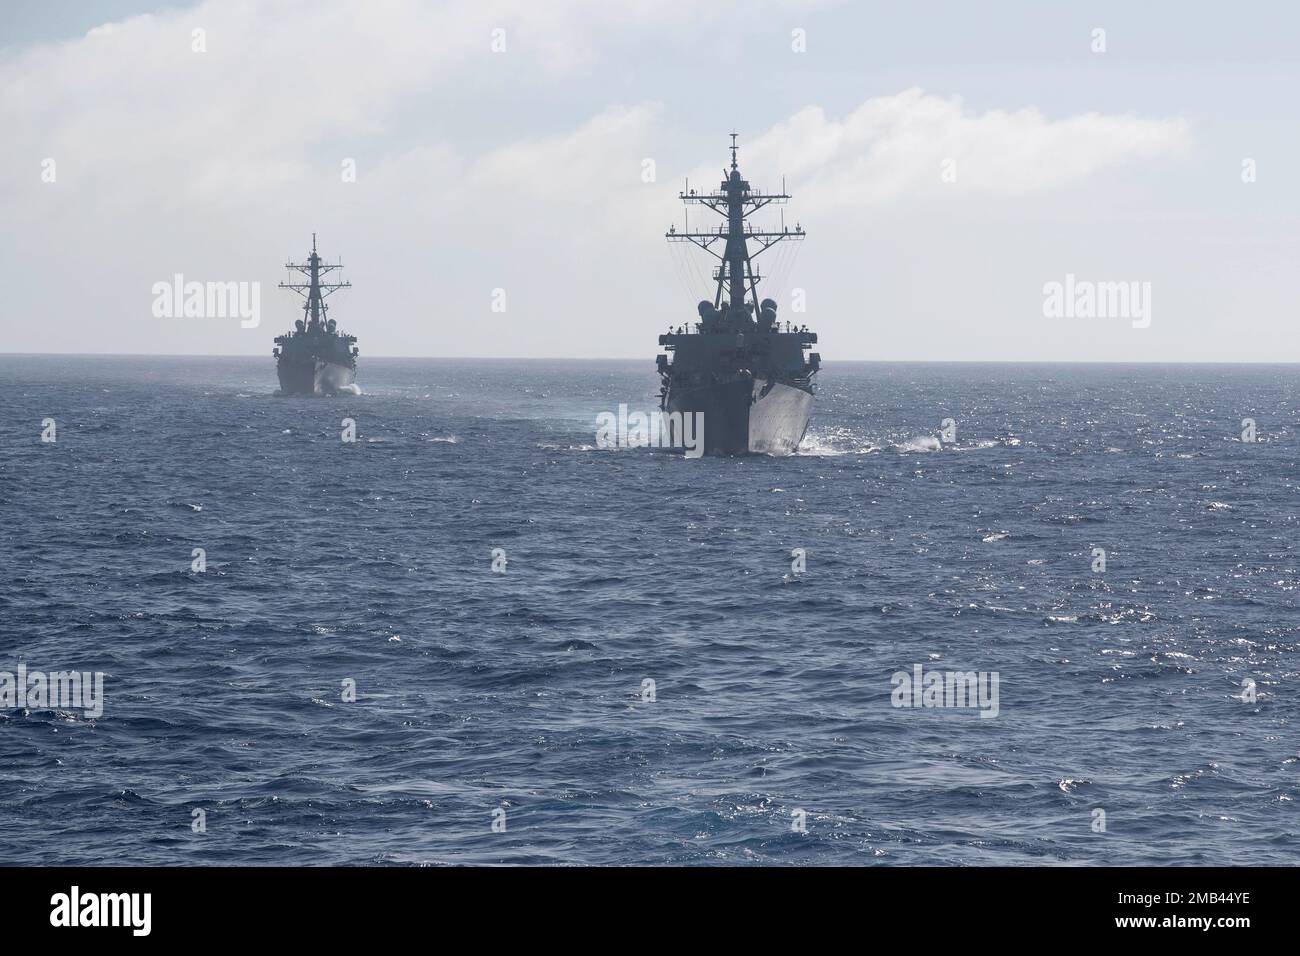 220612-N-XN177-1252 (PHILIPPINE SEA) – Arleigh Burke-class guided-missile destroyers USS Benfold (DDG 65), right, and USS Fitzgerald (DDG 62) steam behind amphibious assault carrier USS Tripoli (LHA 7) during a photo exercise for Valiant Shield 2022, June 12, 2022. Exercises like VS22 allow forces across the Indo-Pacific the opportunity to integrate Navy, Marine Corps, Army, Air Force and Space Force to train in precise, lethal, and overwhelming multi-axis, multi-domain effects that demonstrate the strength and versatility of the Joint Force. Tripoli is operating in the U.S. 7th Fleet area of Stock Photo